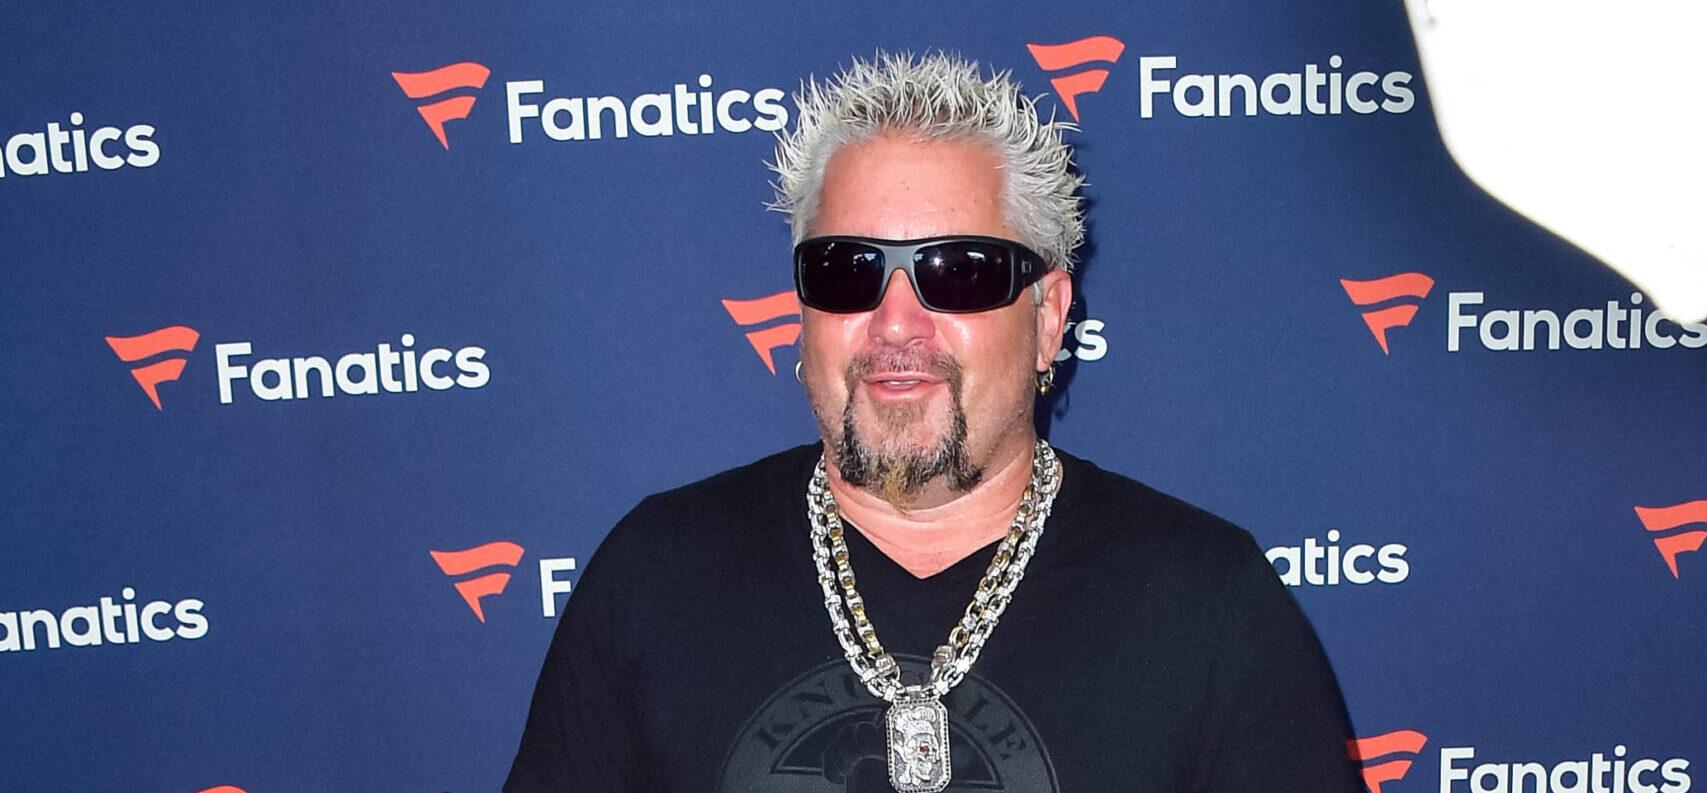 Guy Fieri attends Fanatics Superbowl Party at 3Labs in Culver City